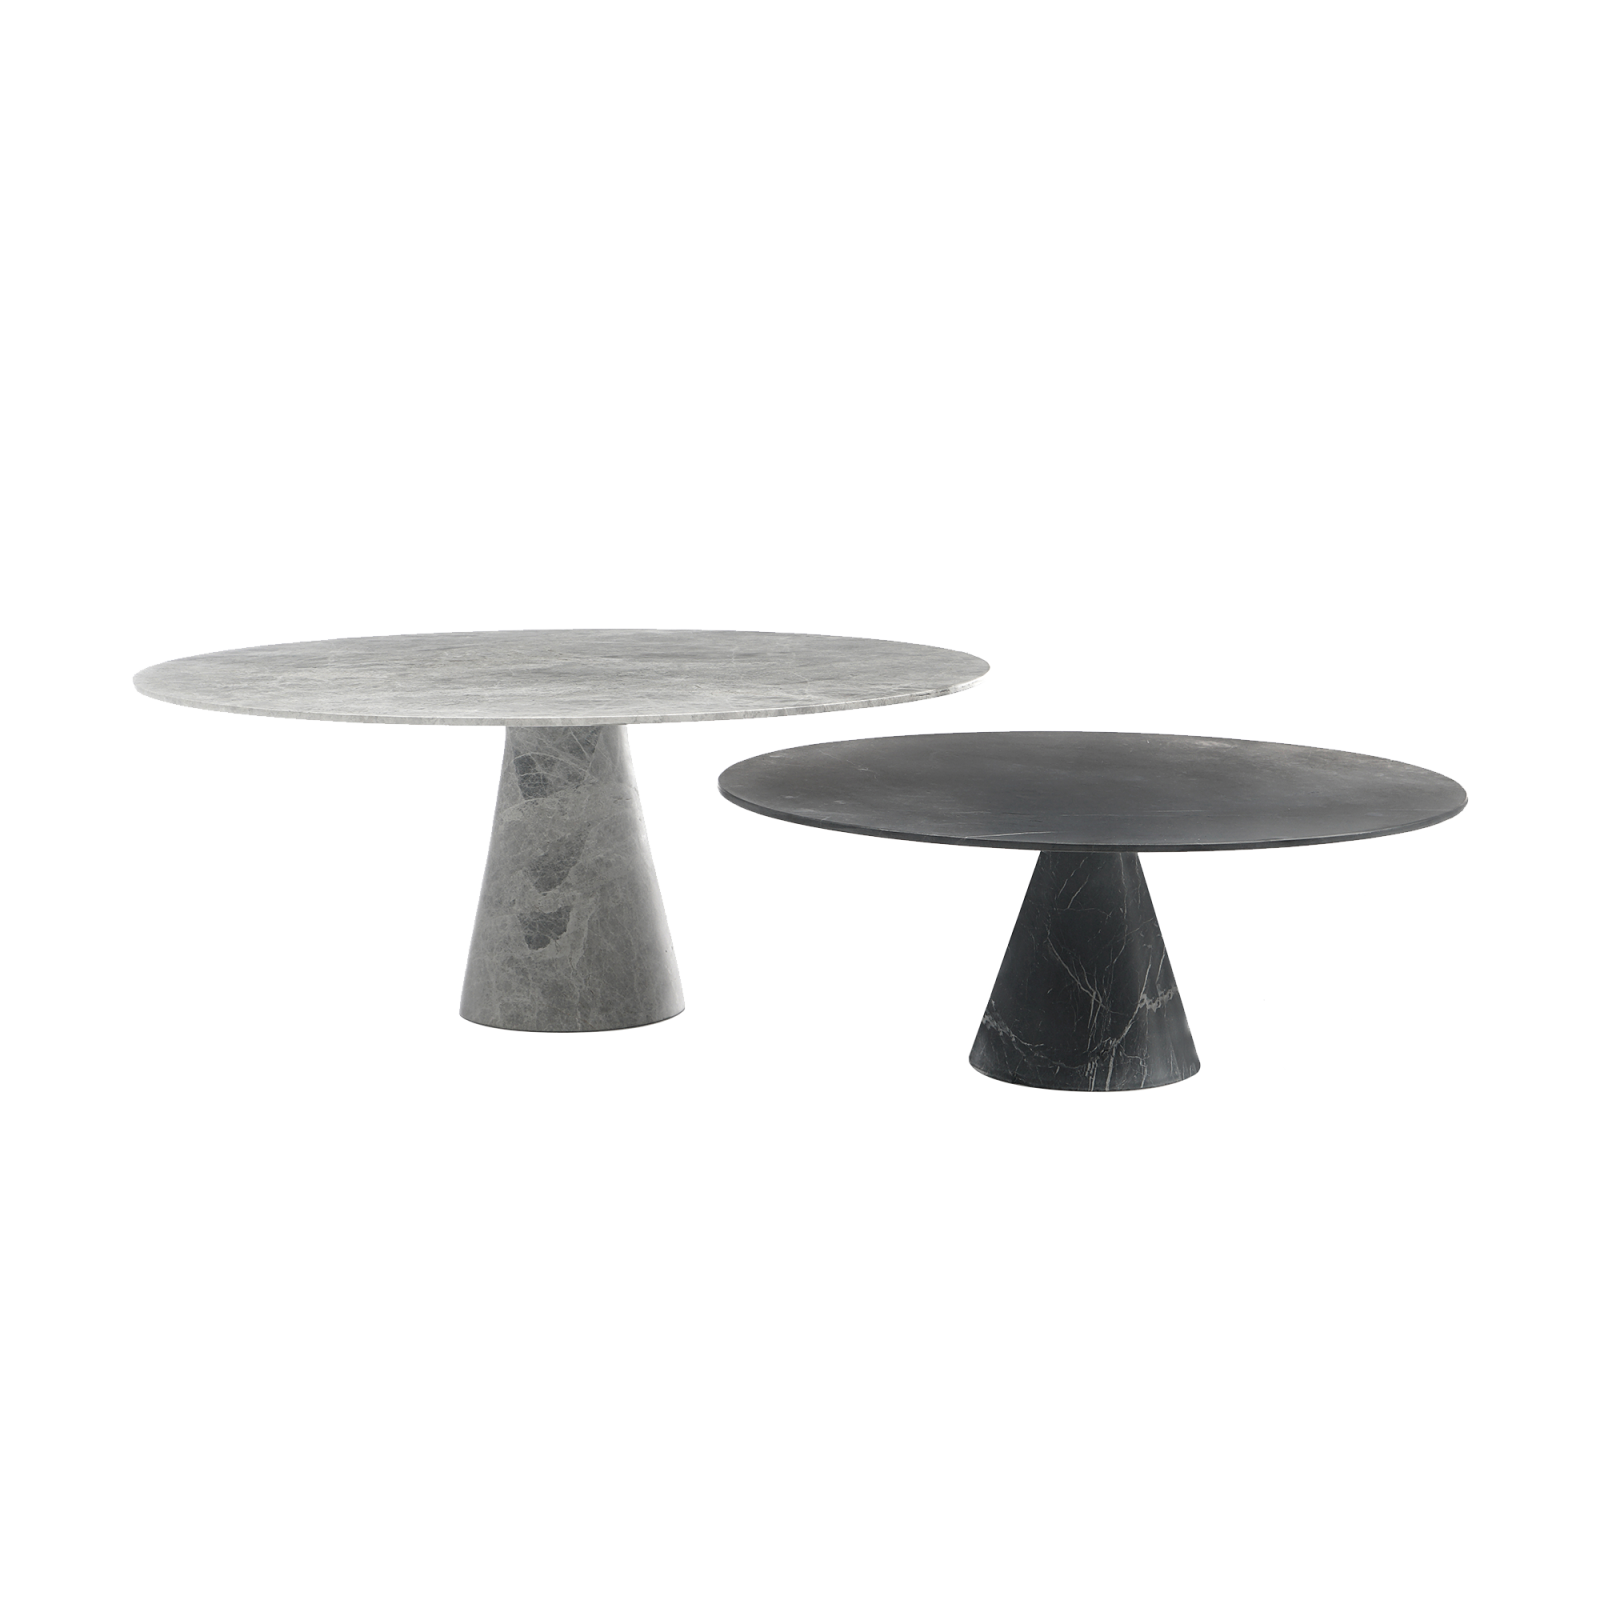 Two different marble IDEE coffee tables, black and white